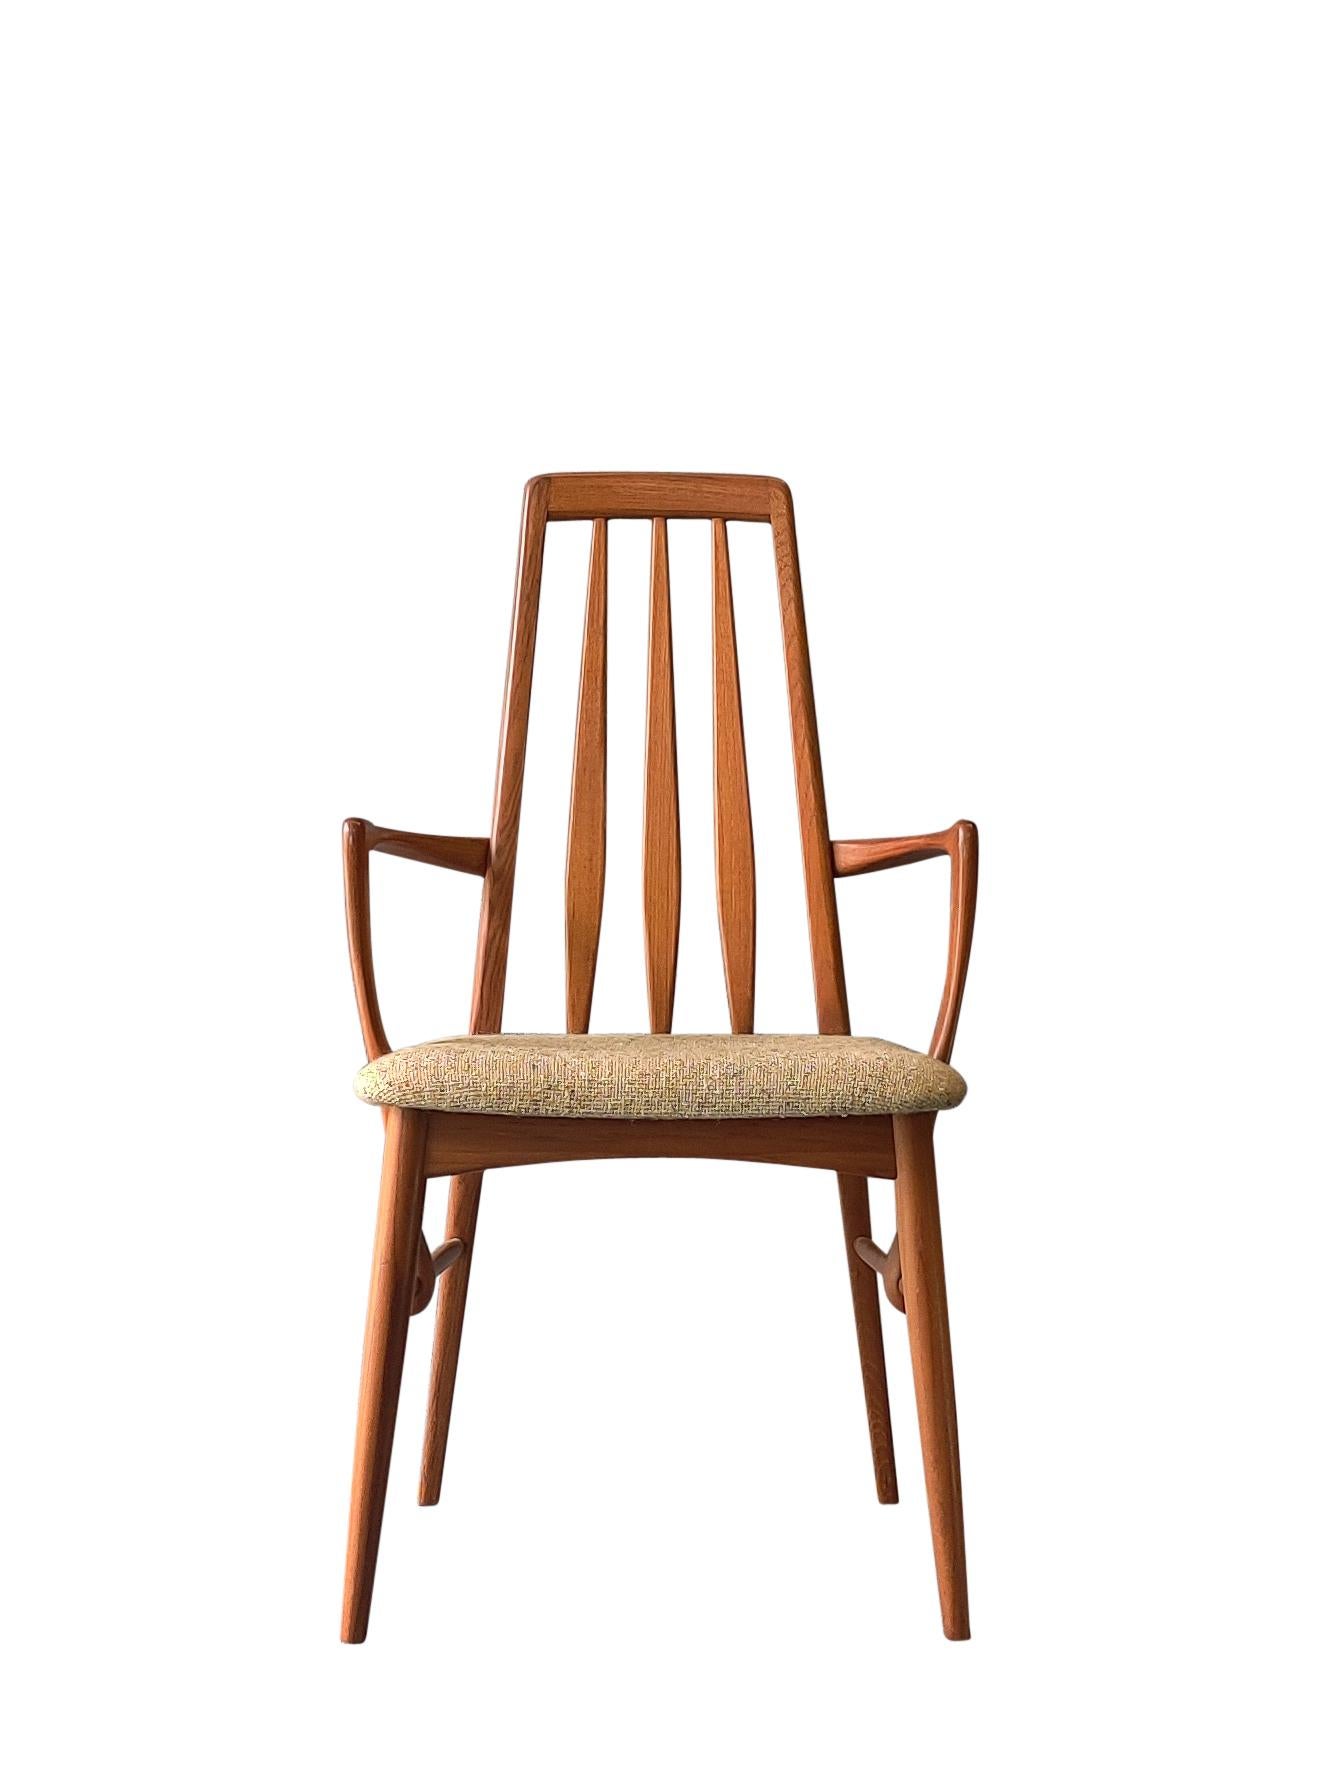 A stunning set of six vintage Danish dining chairs in teak and original wool upholstery, dating from the 1970’s. They were designed by Nils Kofoed and made by Koefoeds Hornslet, they are all stamped with the makers mark beneath the seats. Features